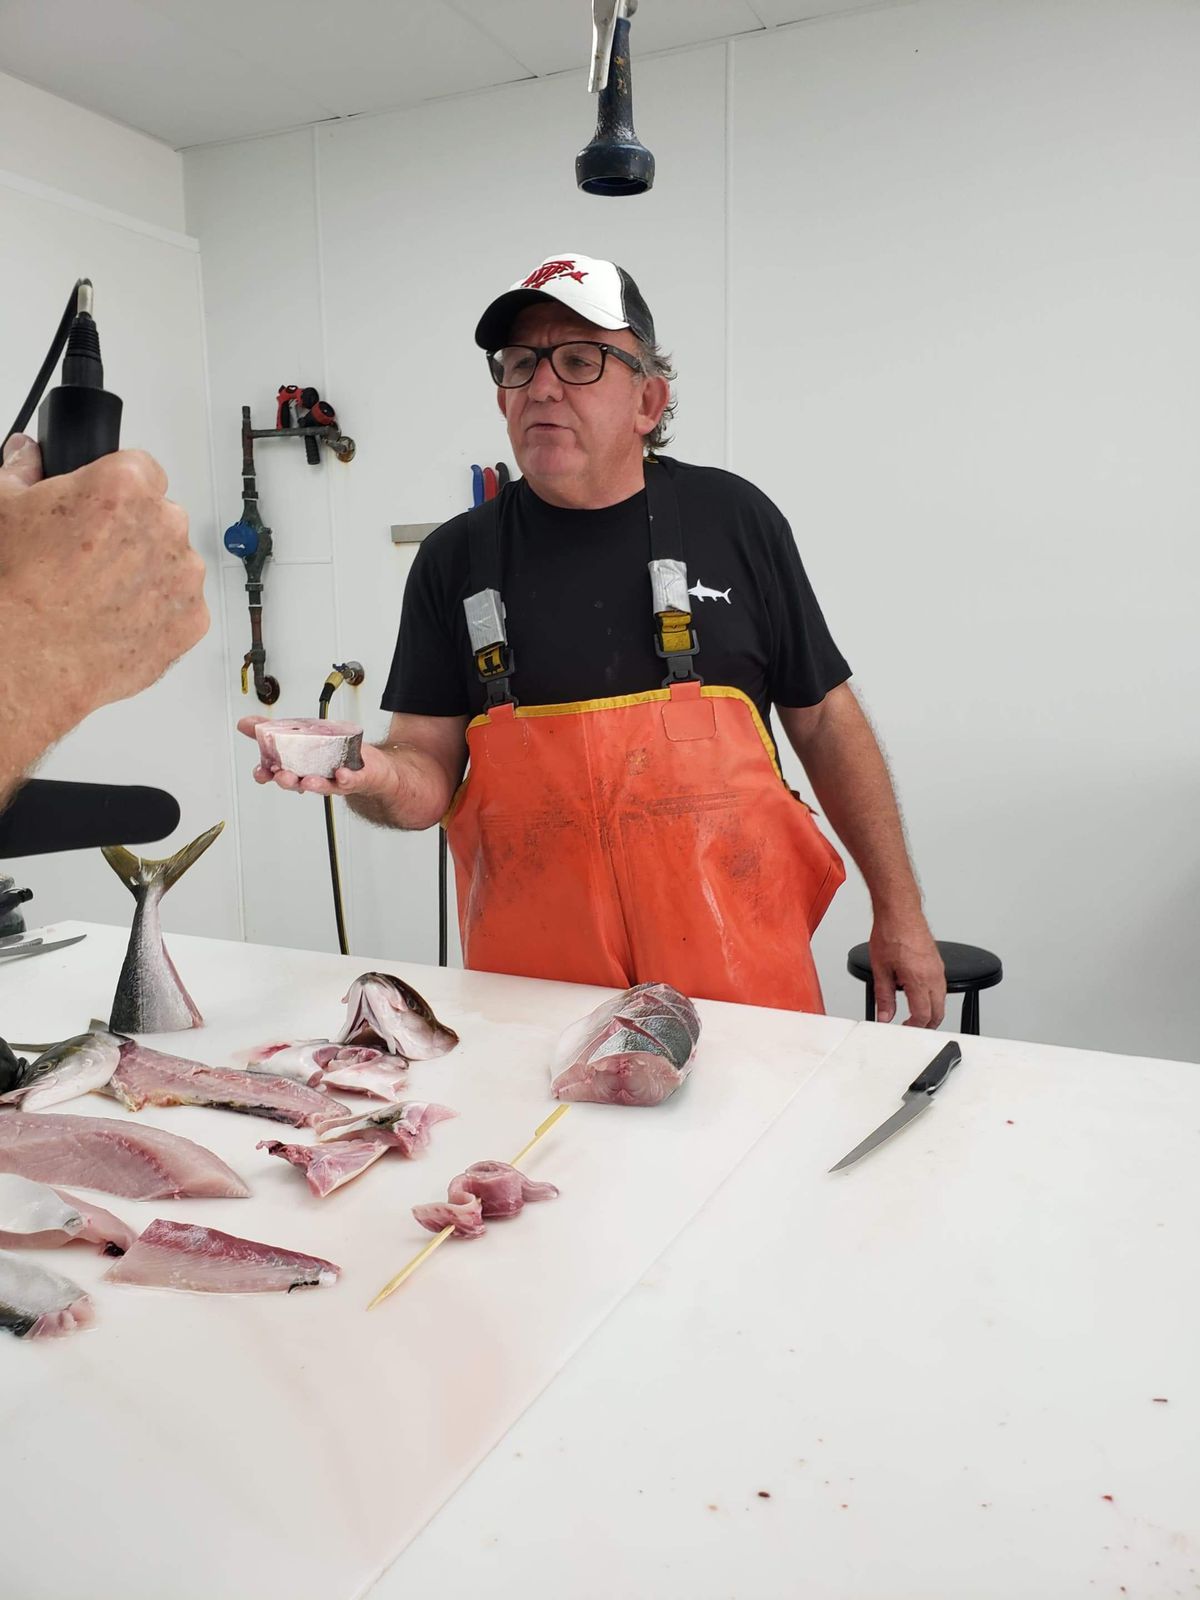 Fishmonger Tommy Gomes wearing overalls while talking and filleting fish